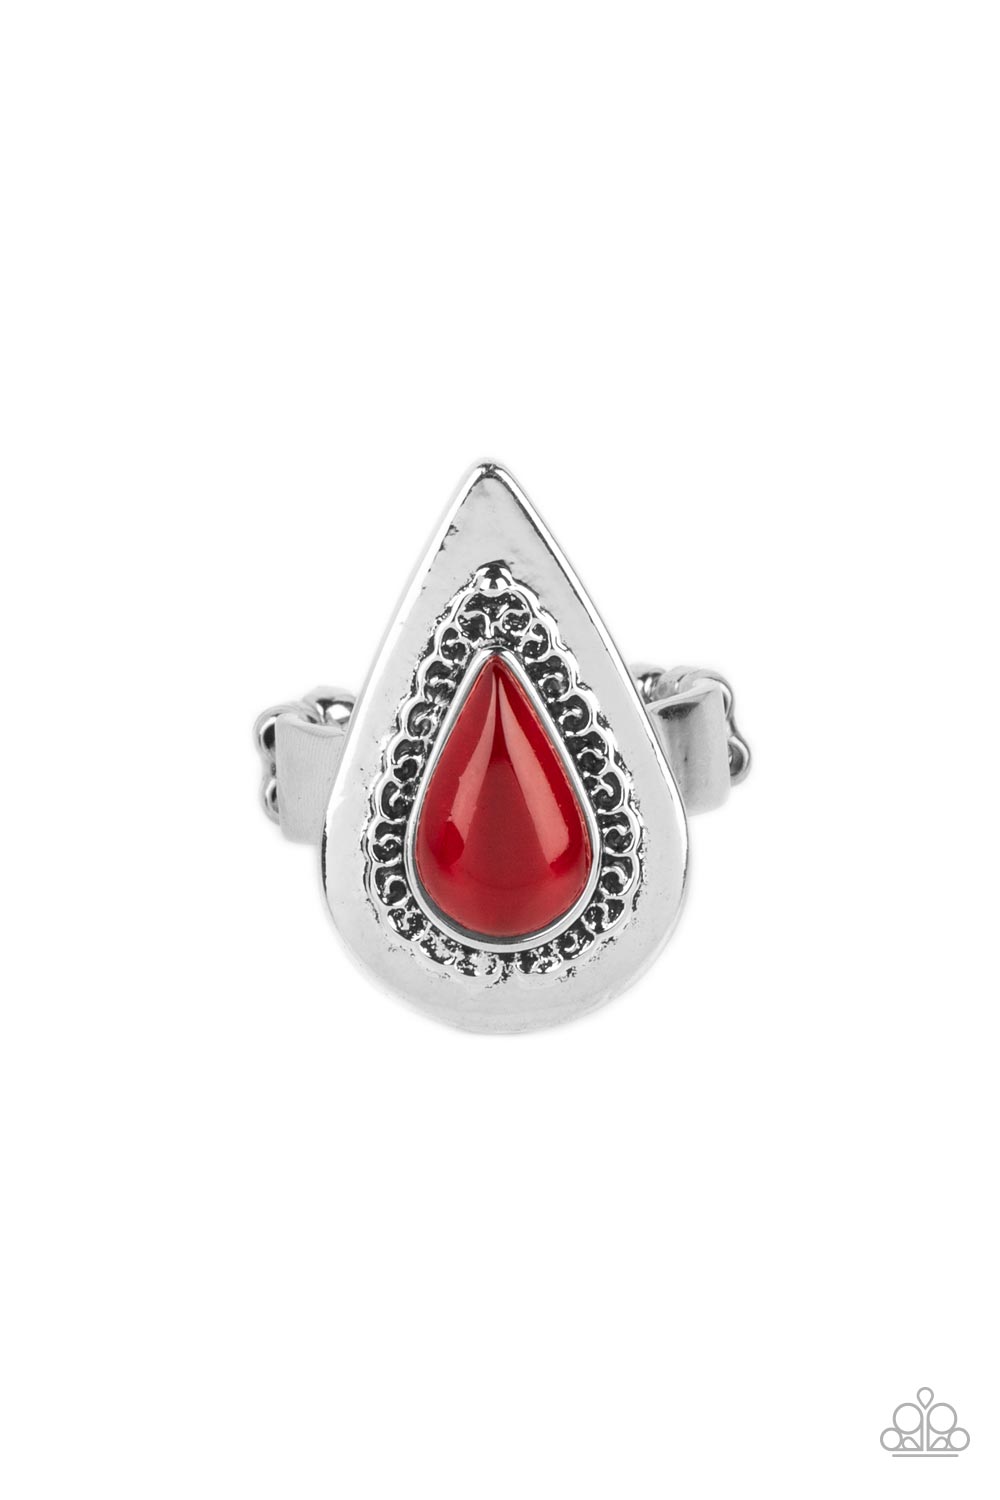 Earthy Glow Red Cat's Eye Stone Ring - Paparazzi Accessories- lightbox - CarasShop.com - $5 Jewelry by Cara Jewels